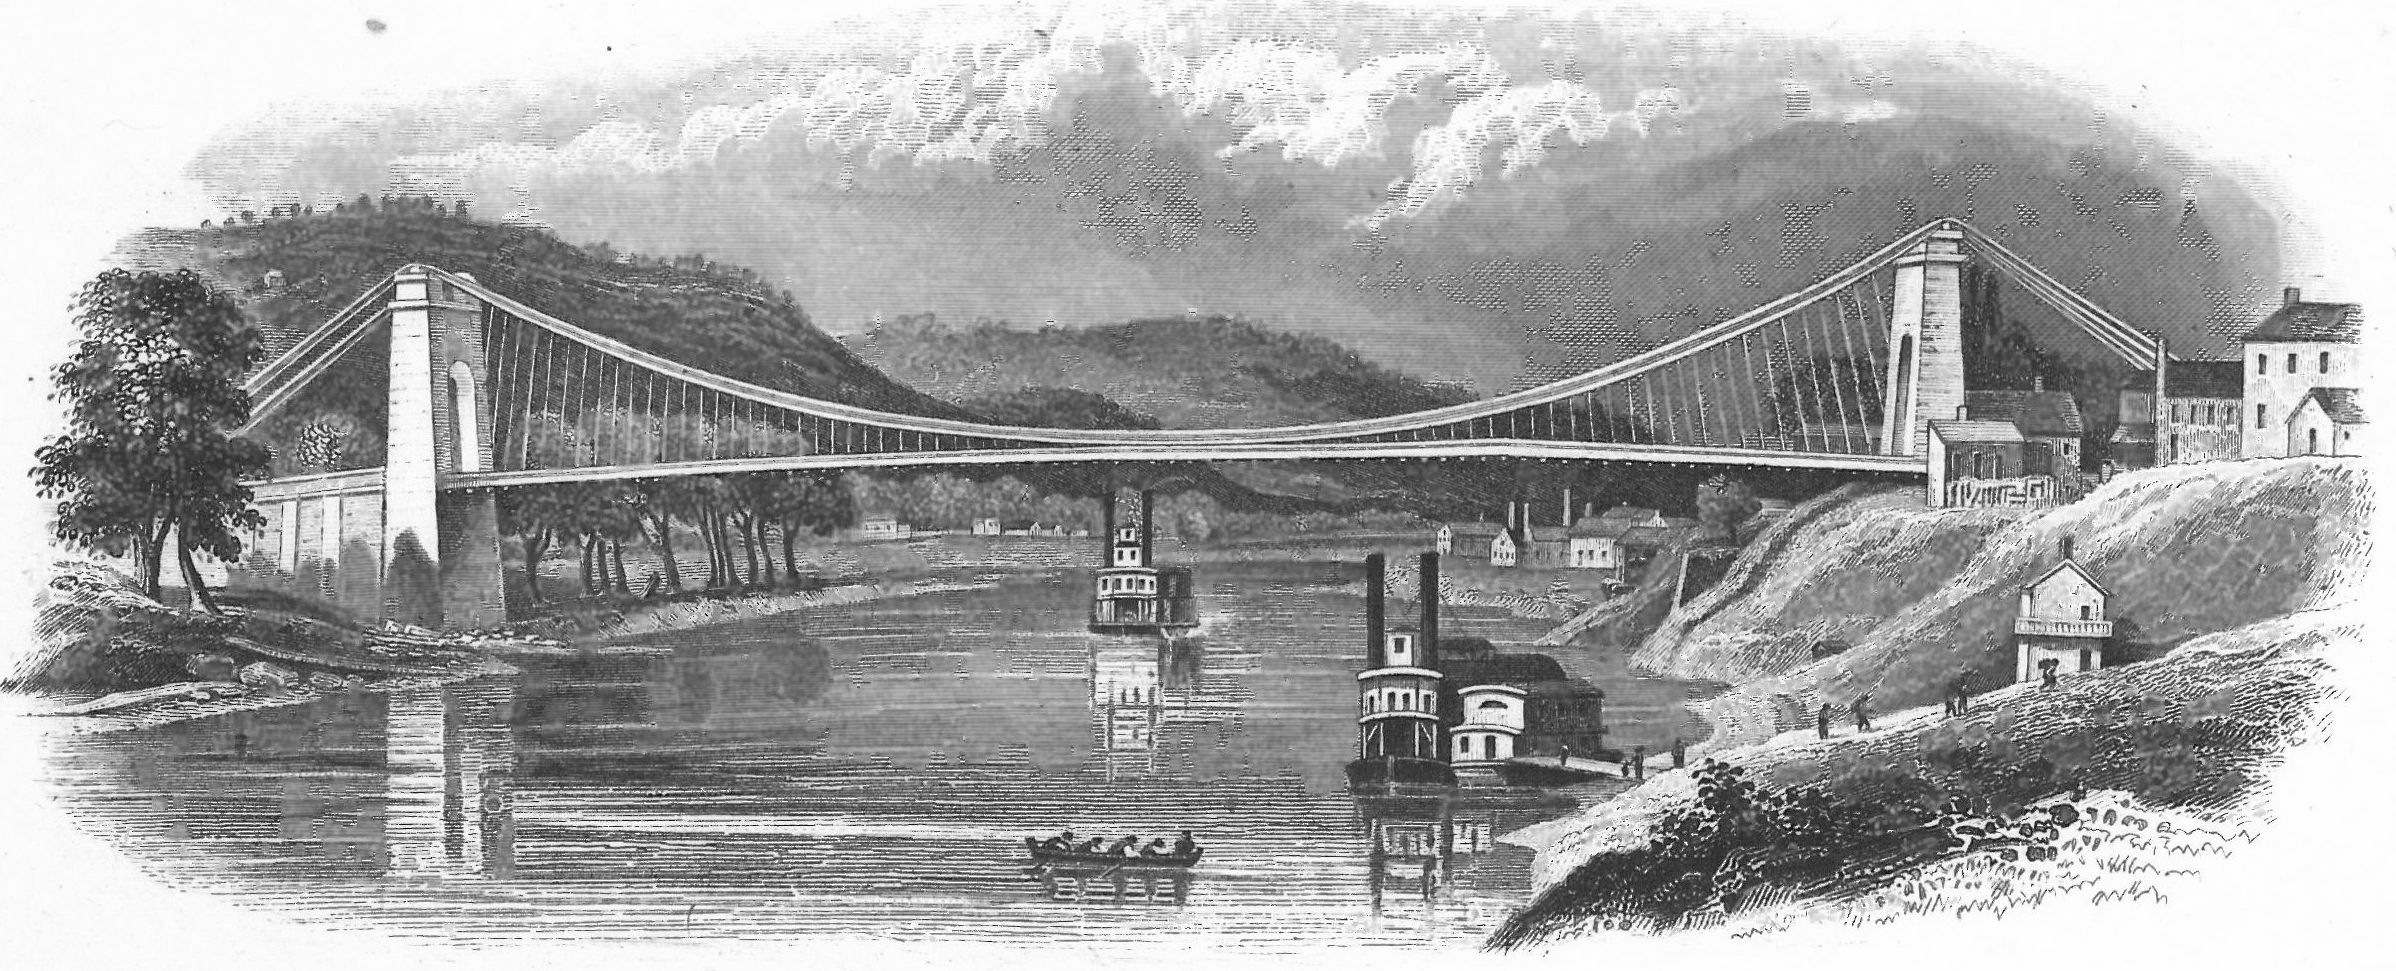 Stanton represented Pennsylvania in its suit against the Wheeling Suspension Bridge, which blocked steamboats from passing down the Ohio River.